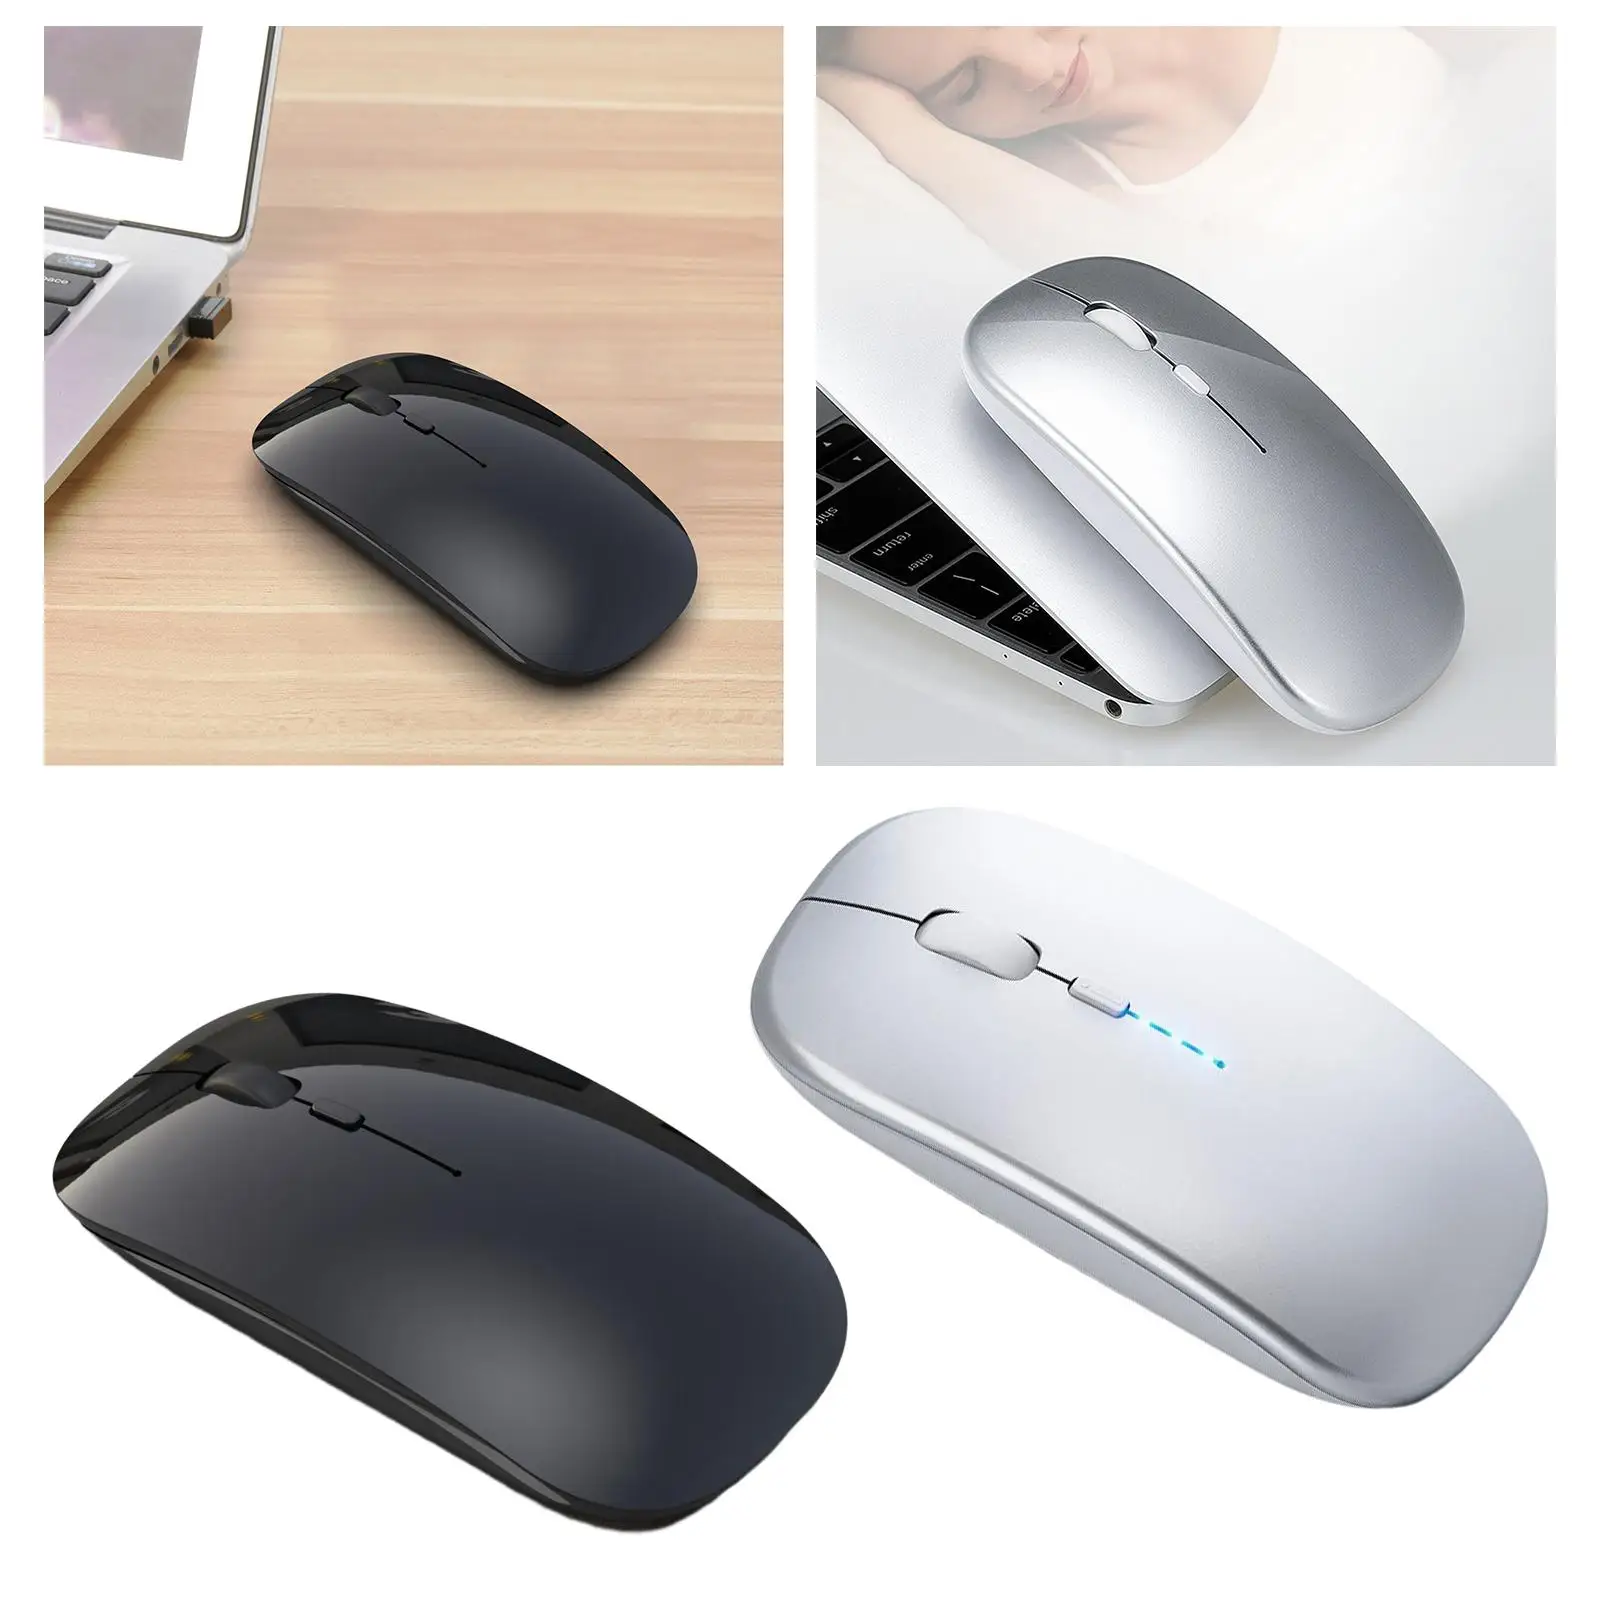 Portable 2.4G & Bluetooth 5.0 Wireless Mouse 800 1200 1600 Adjustable DPI Mute Thin Optical Mice for Laptop Computer Office Game